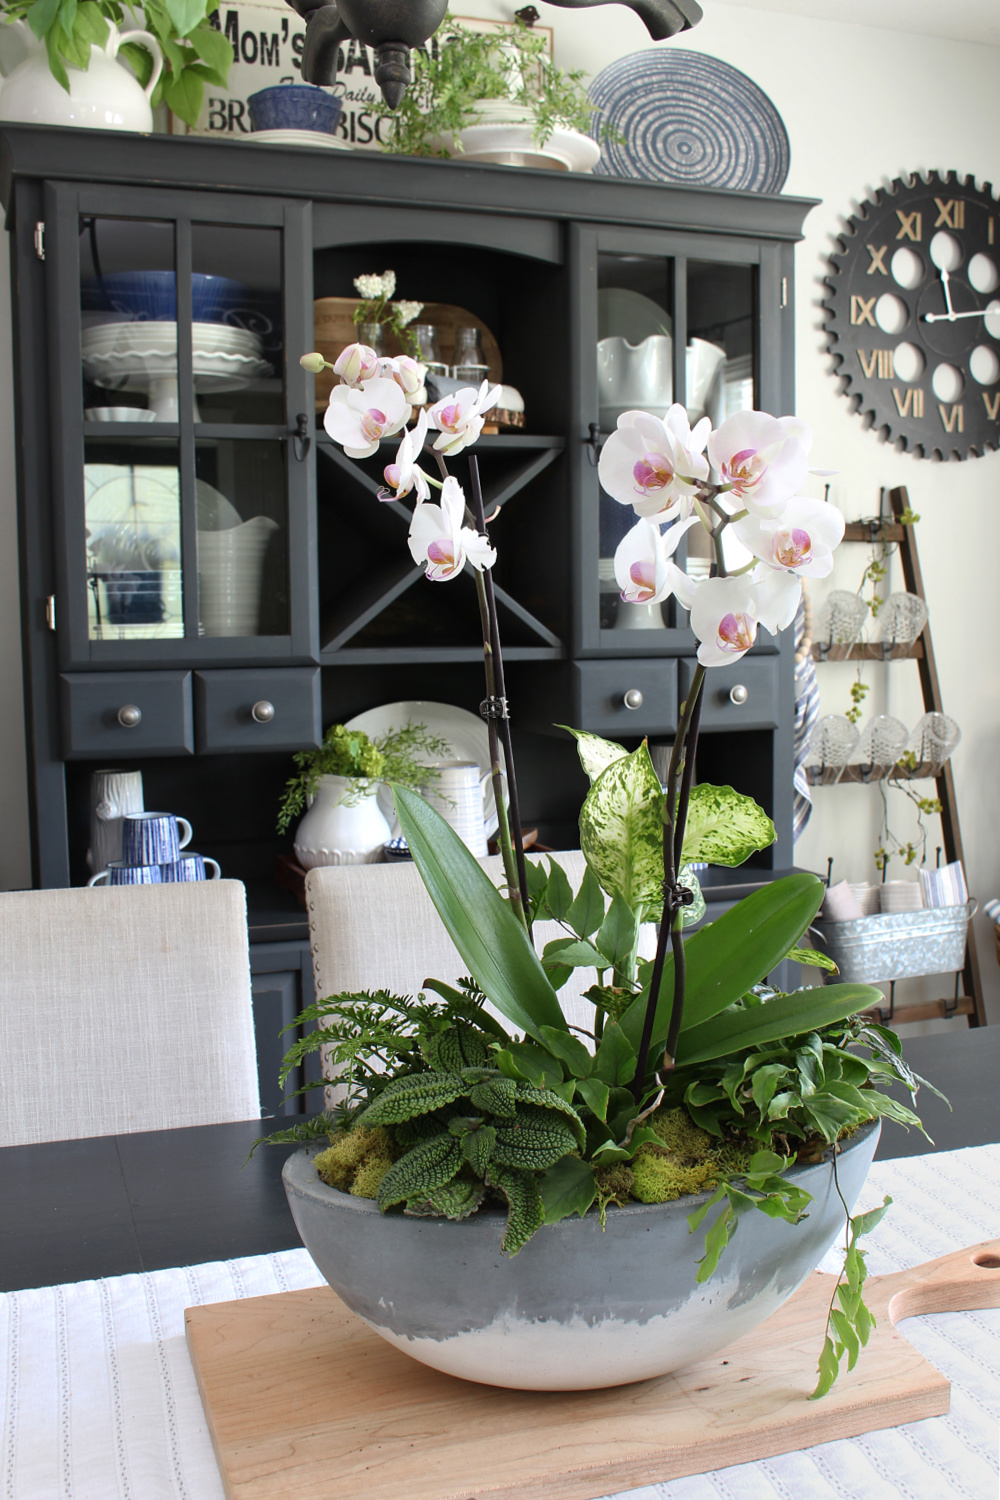 DIY orchid planter centerpiece for summer dining room.